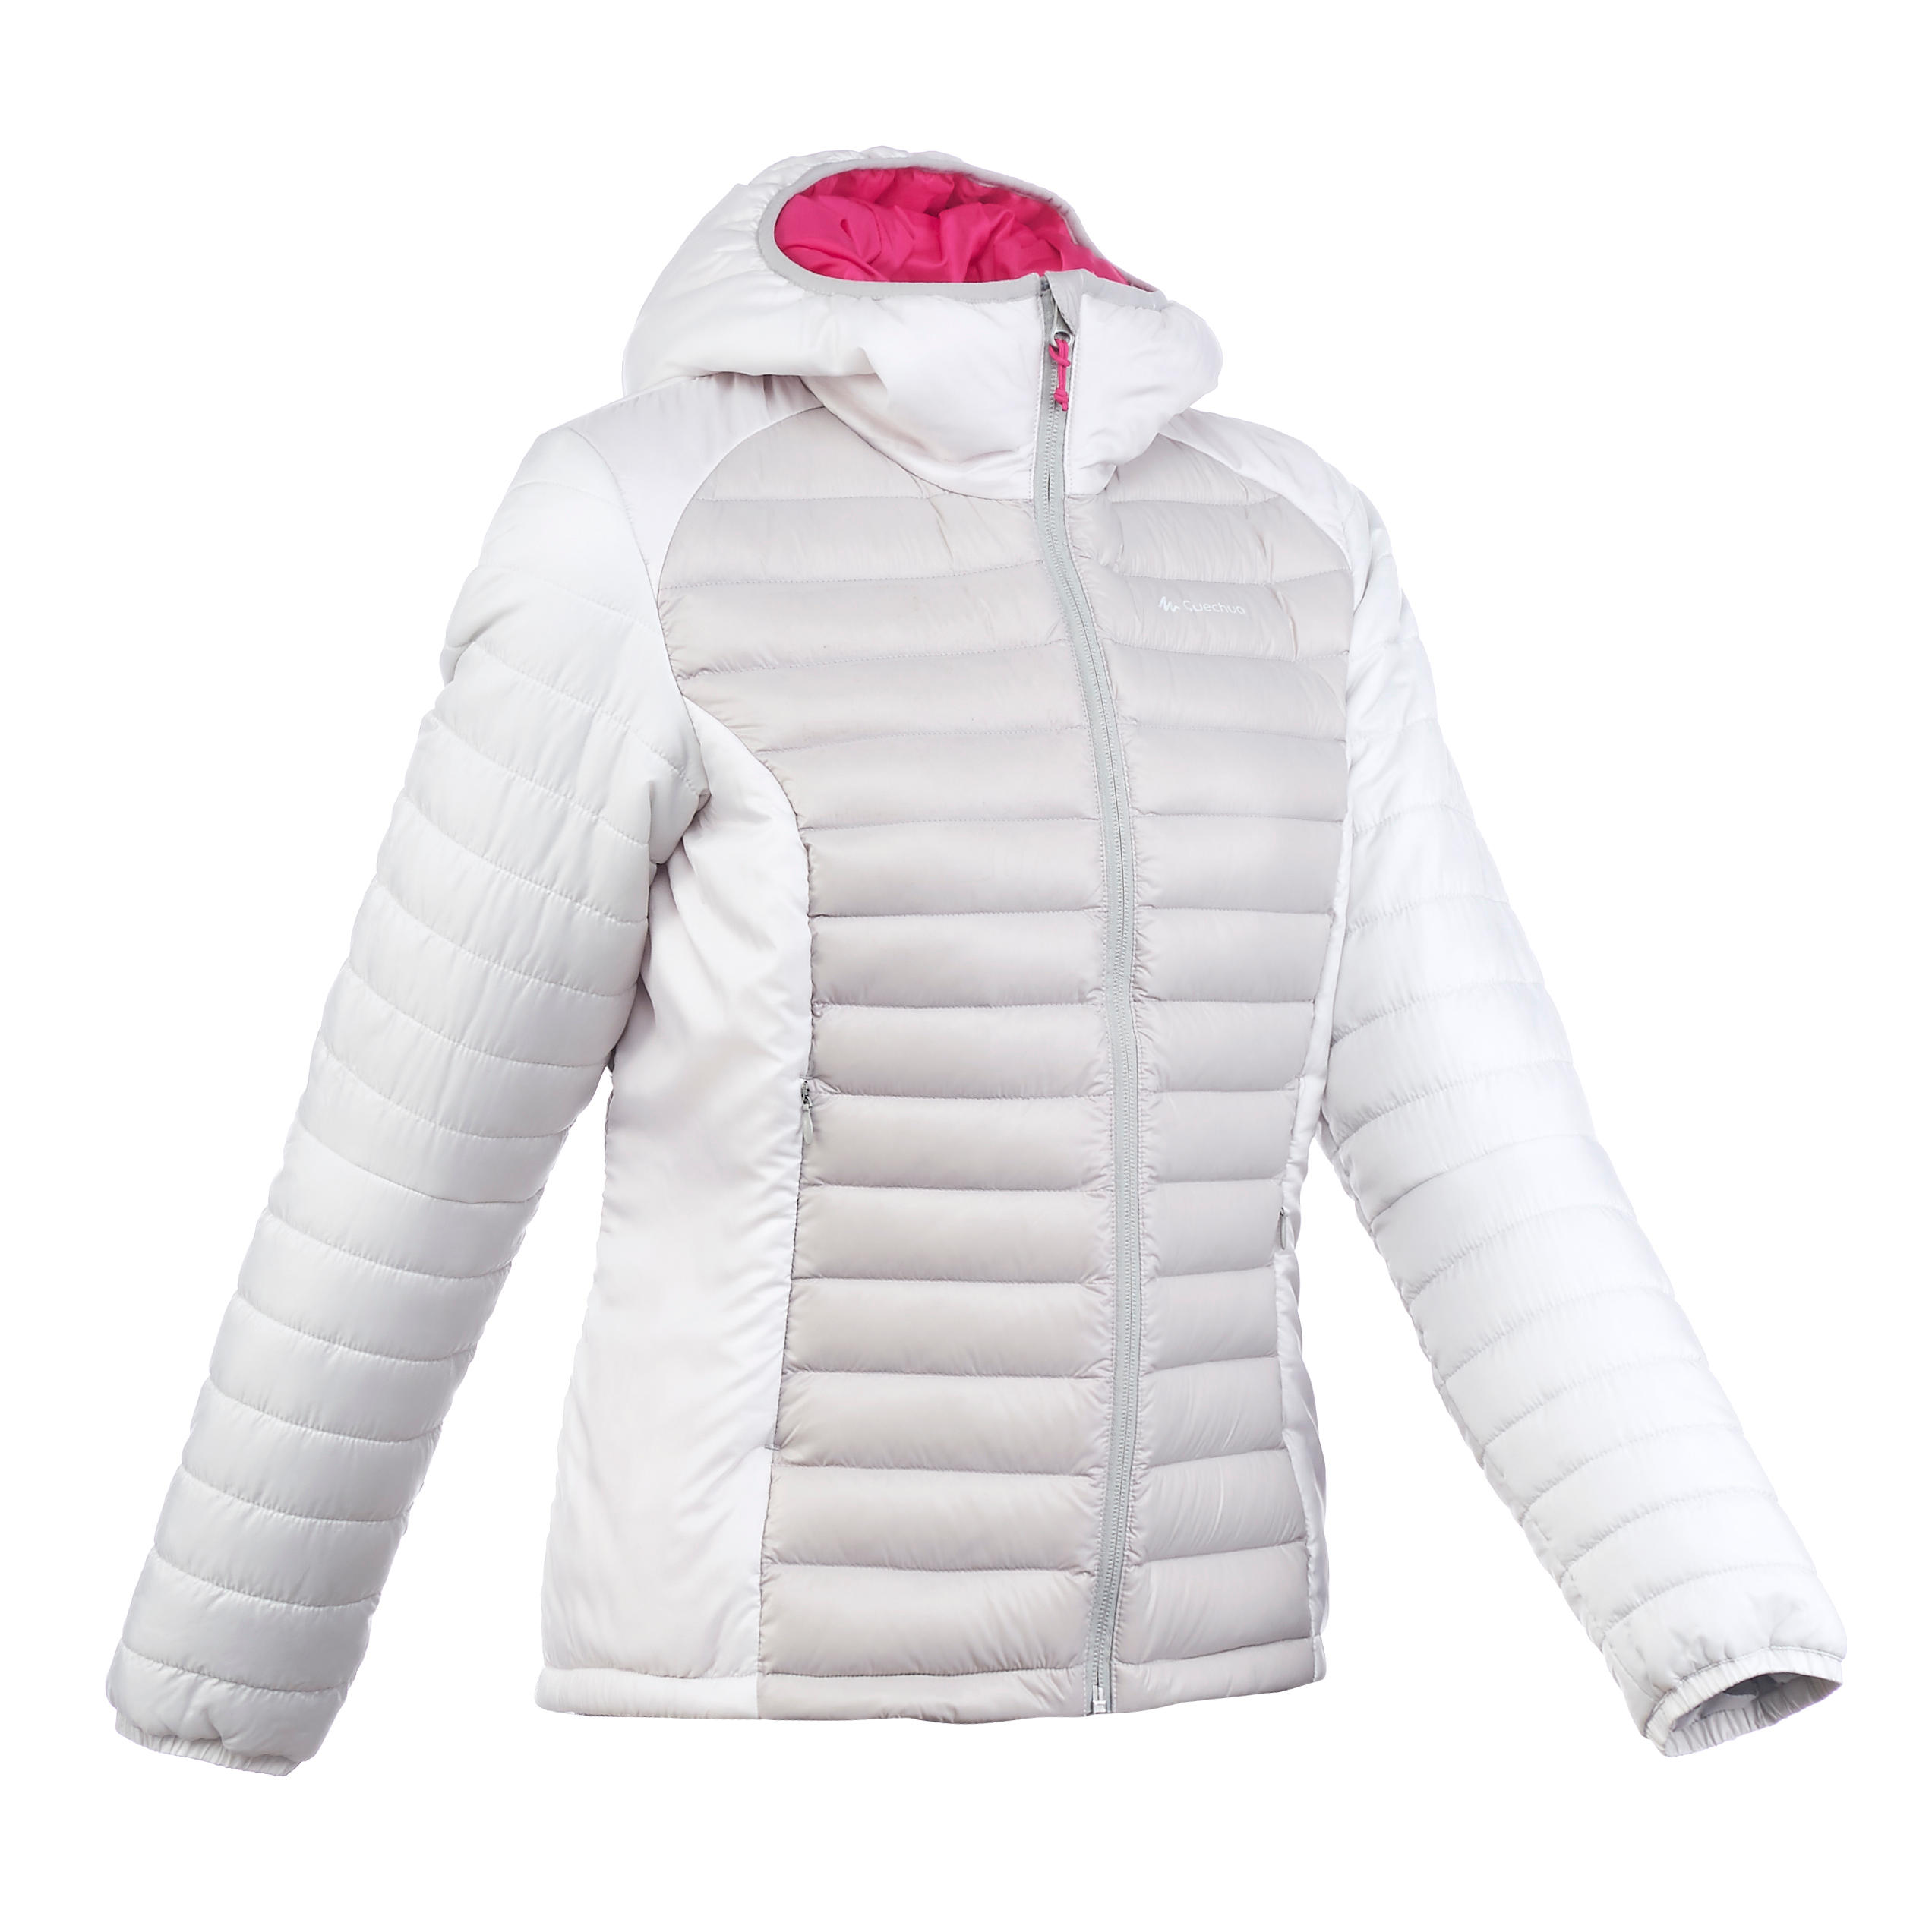 FORCLAZ X-Light 1 Women's Quilted Hiking Jacket - Light grey